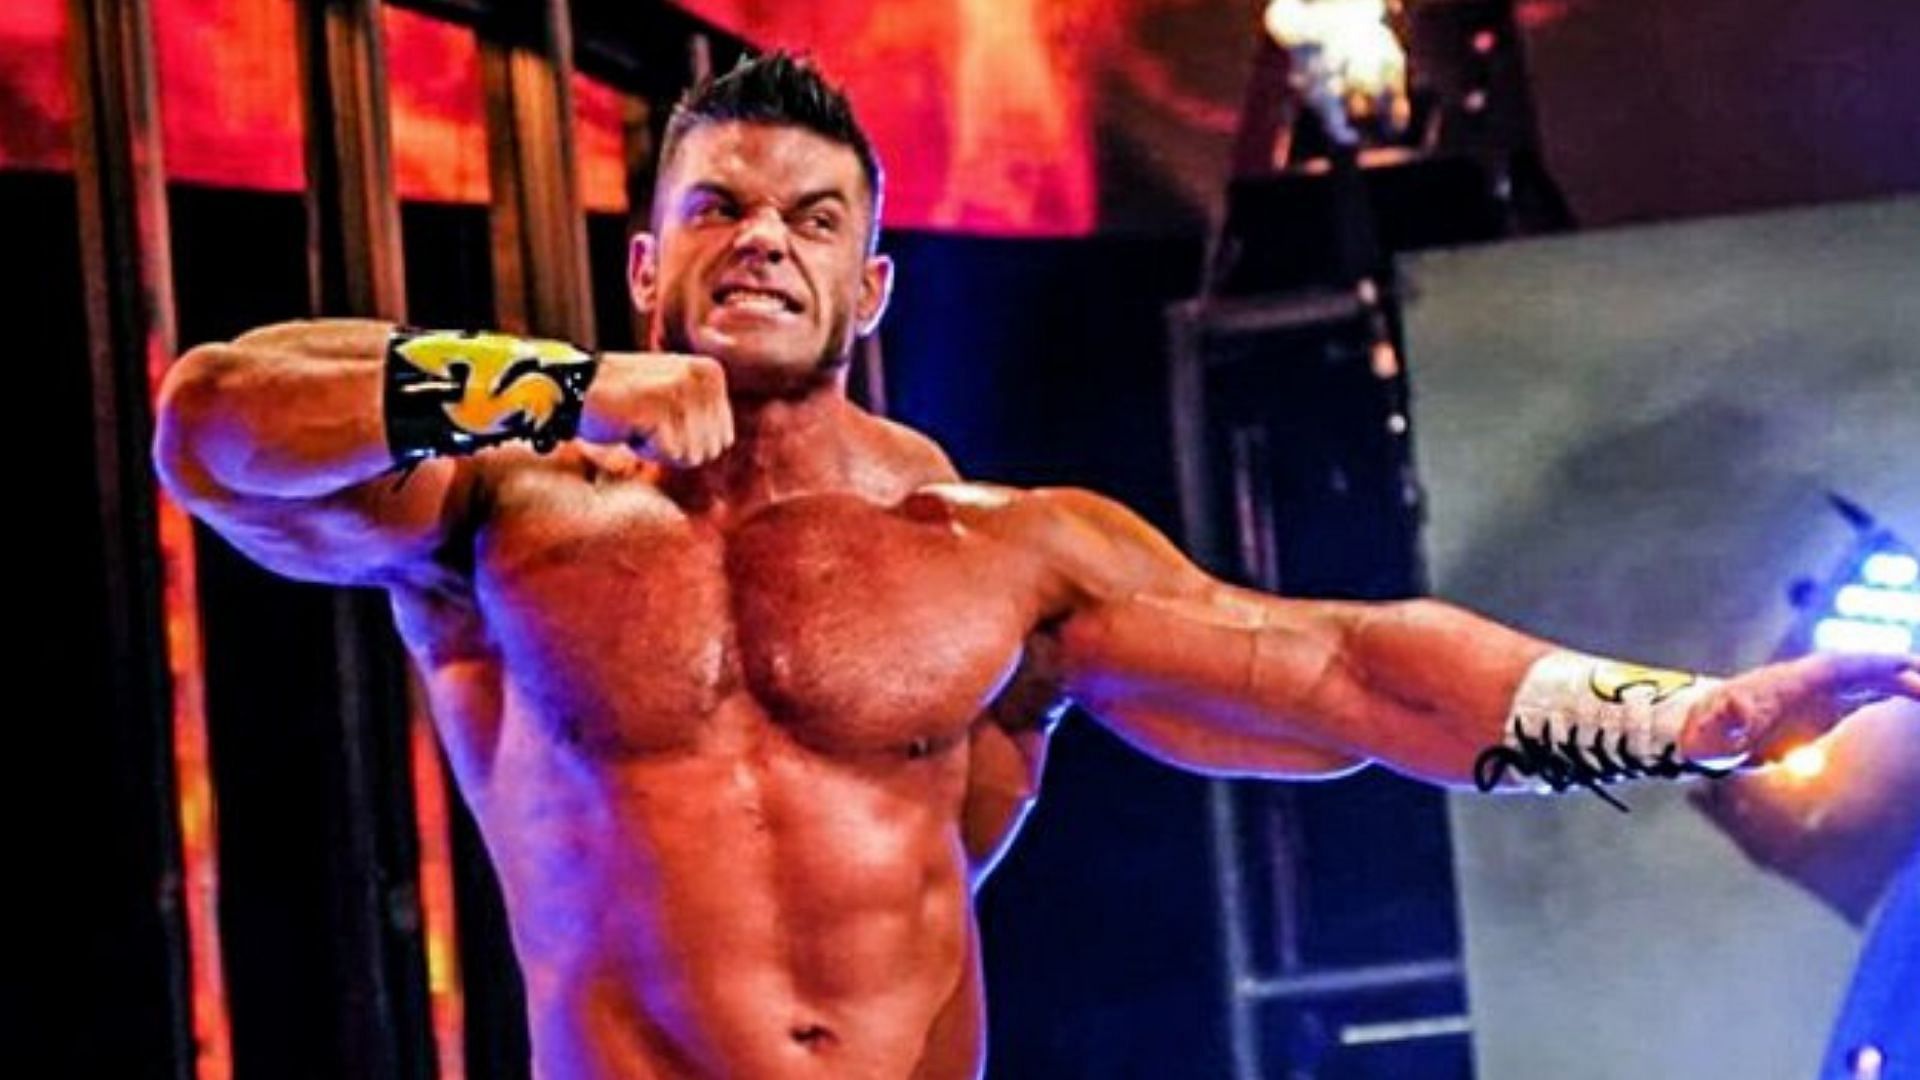 Brian Cage at an AEW event in 2020